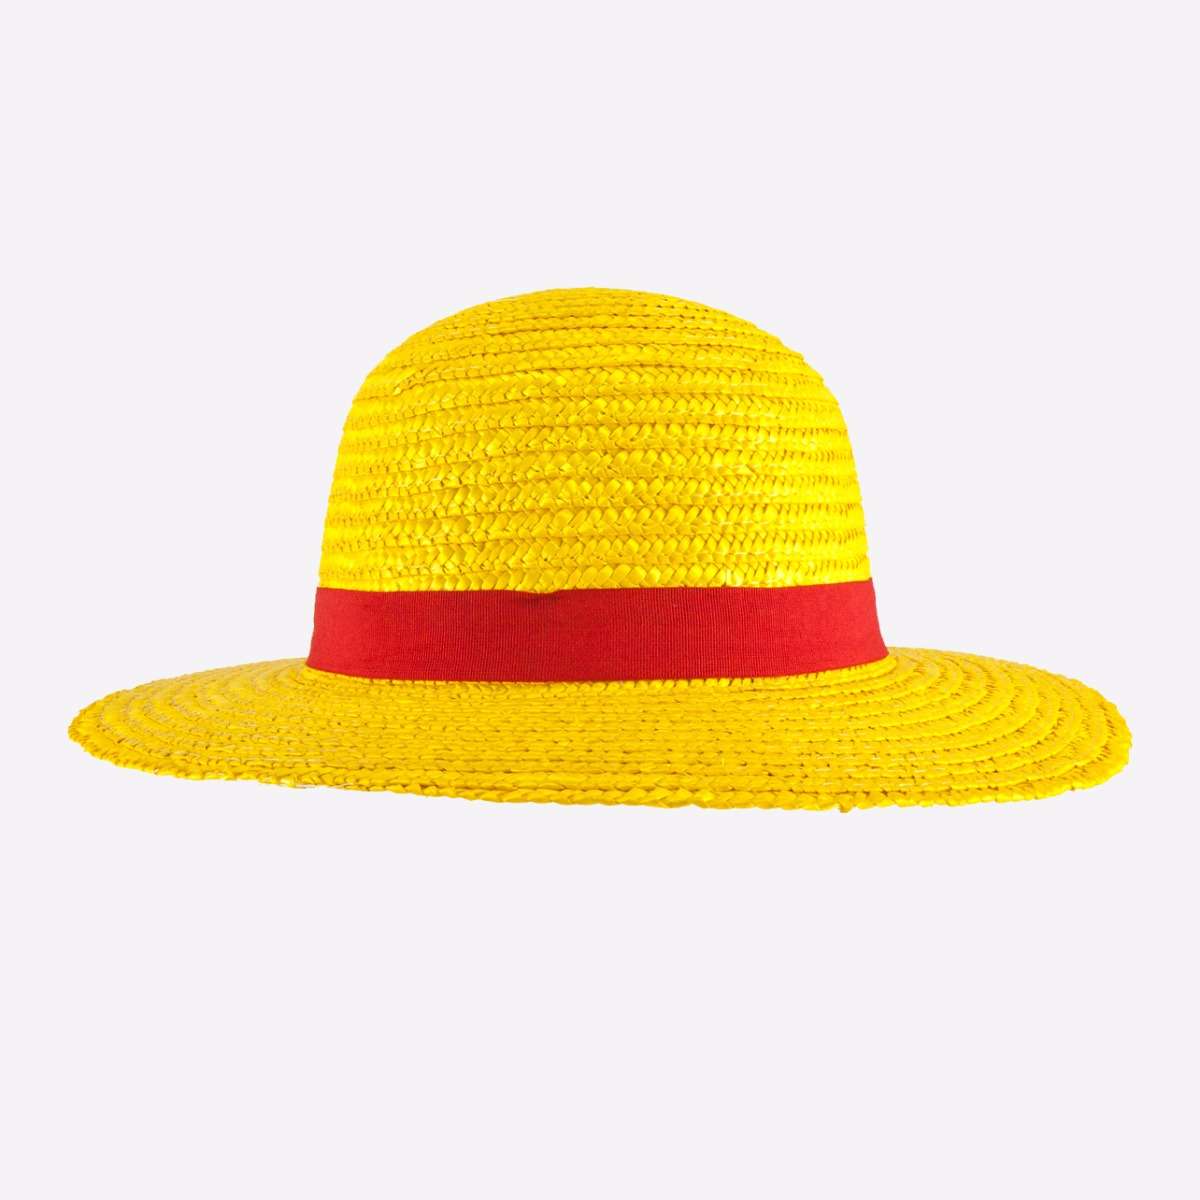 Shop One Piece Luffy's Hat | Funimation